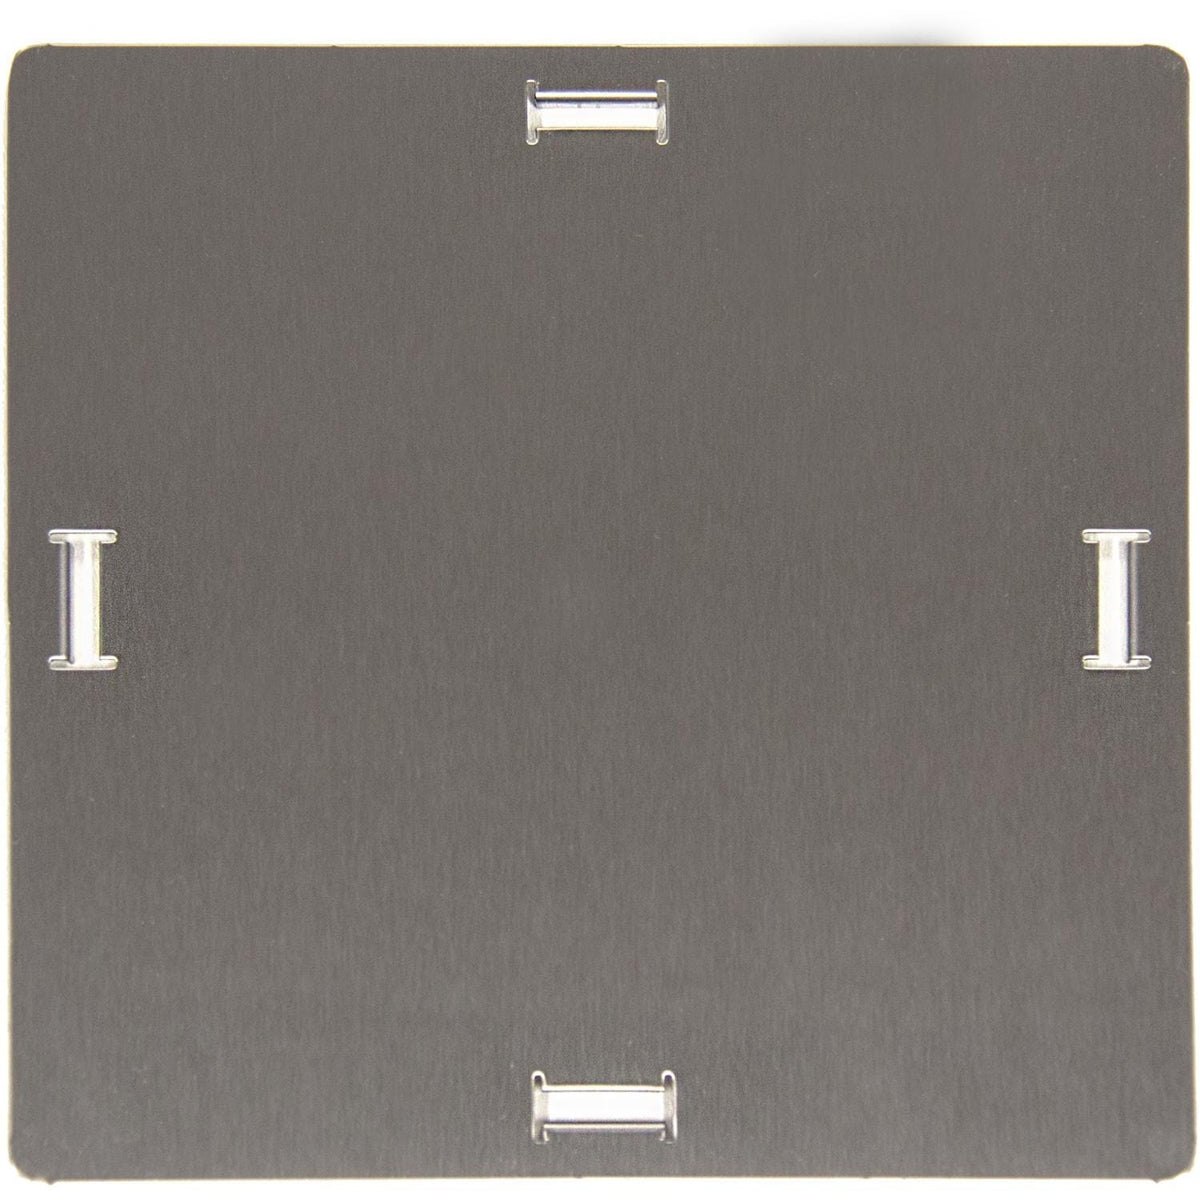 Blaze Stainless Steel LP Hole Cover Full View